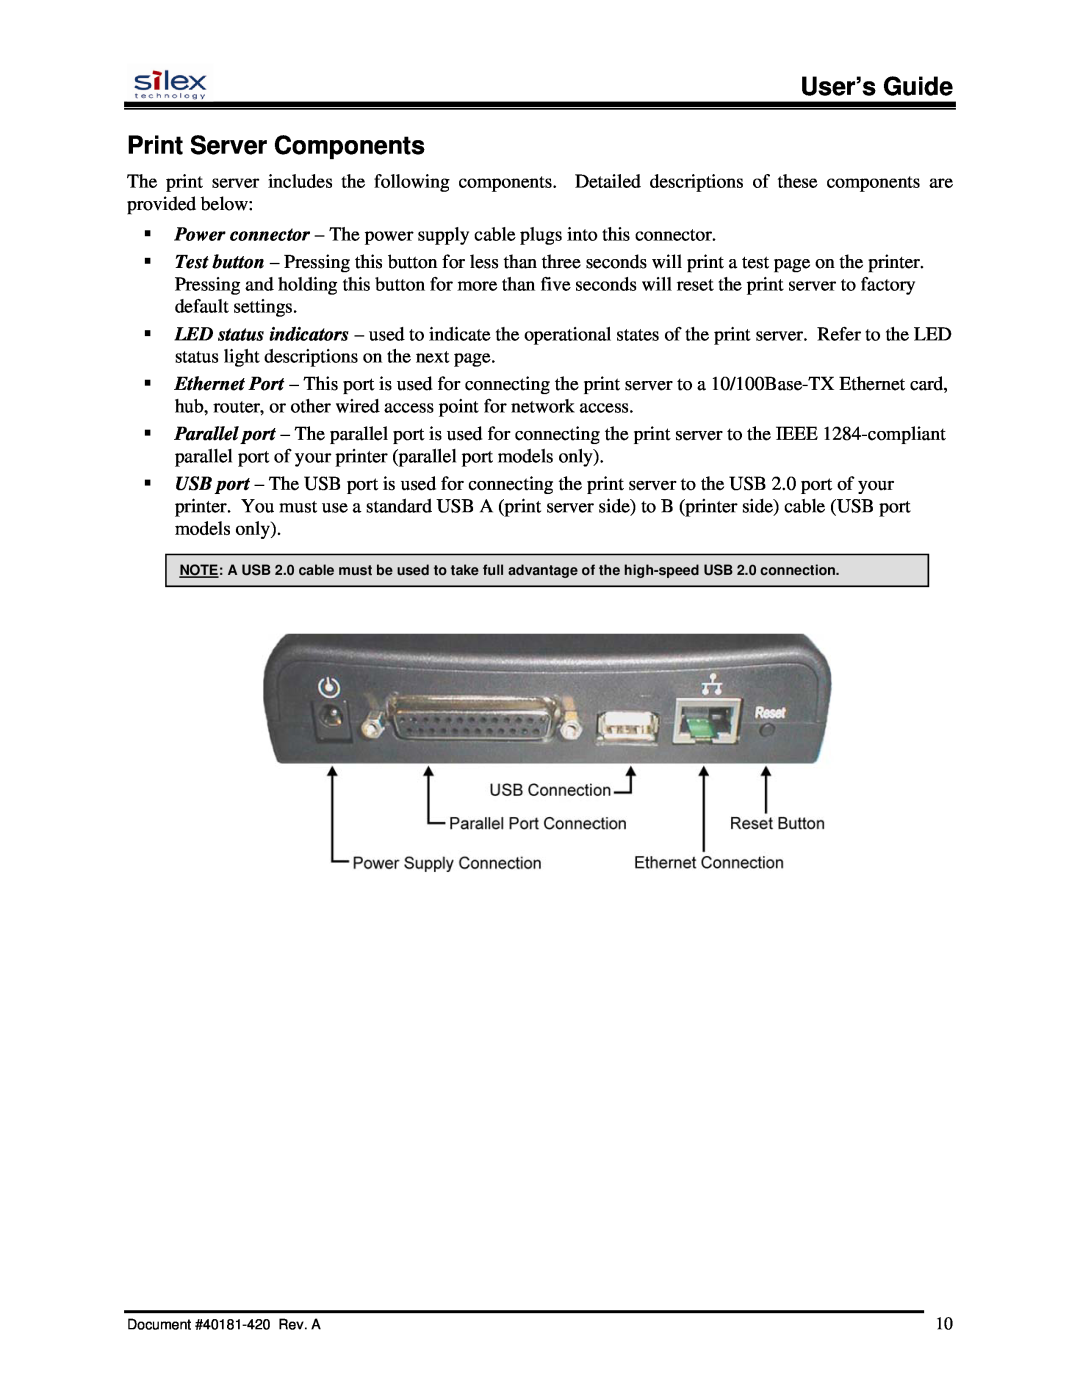 Silex technology SX-200 user manual User’s Guide Print Server Components 